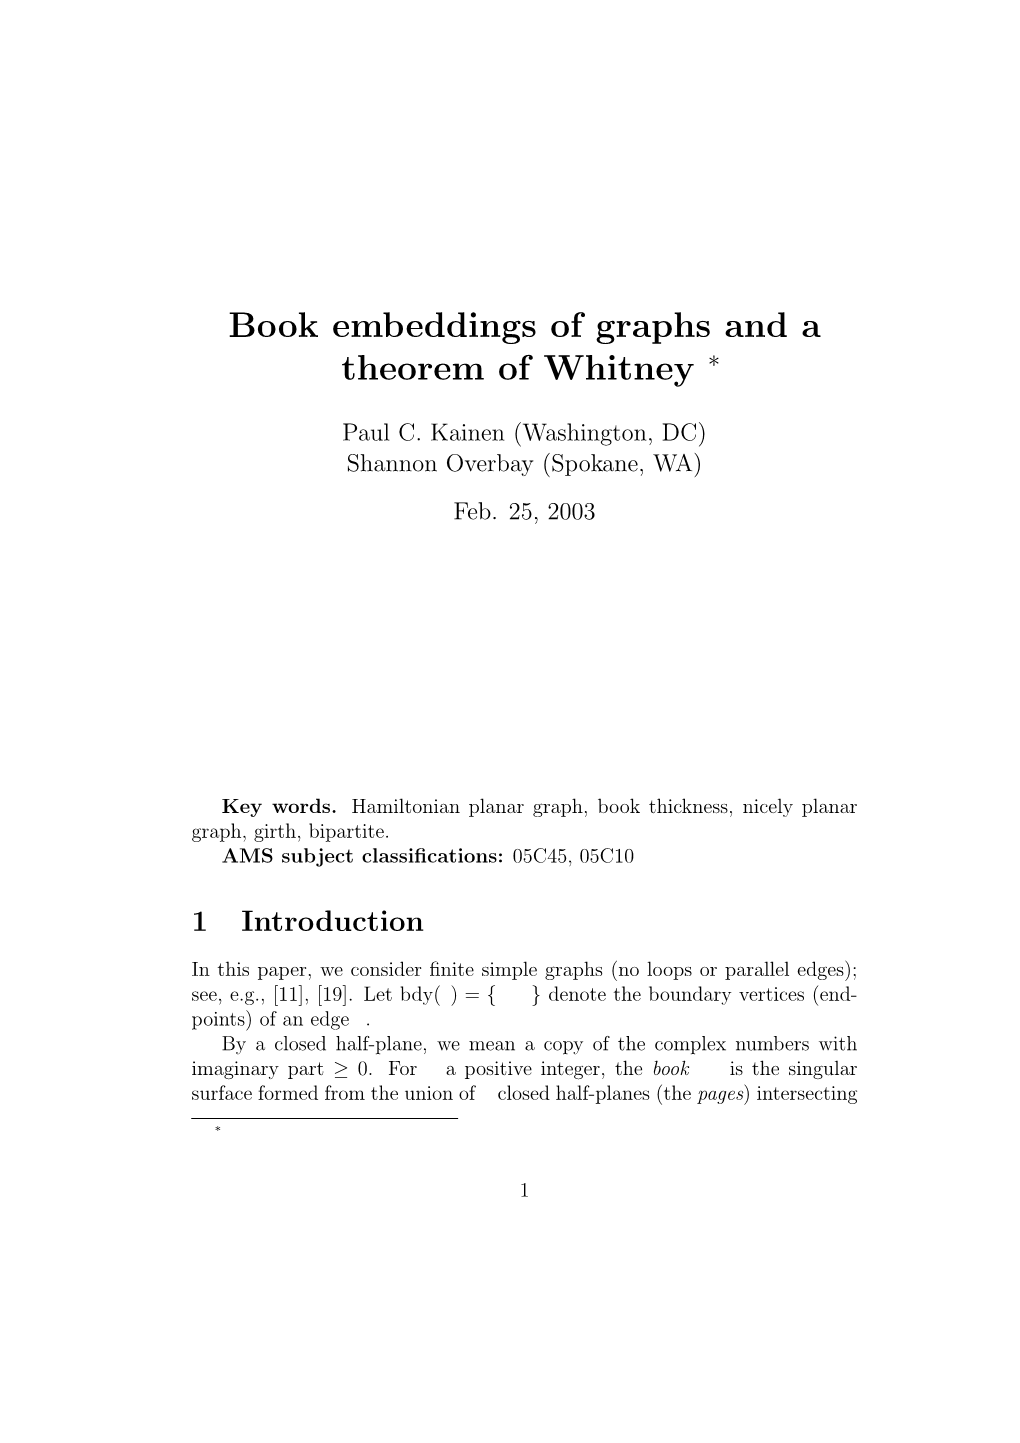 Book Embeddings of Graphs and a Theorem of Whitney ∗